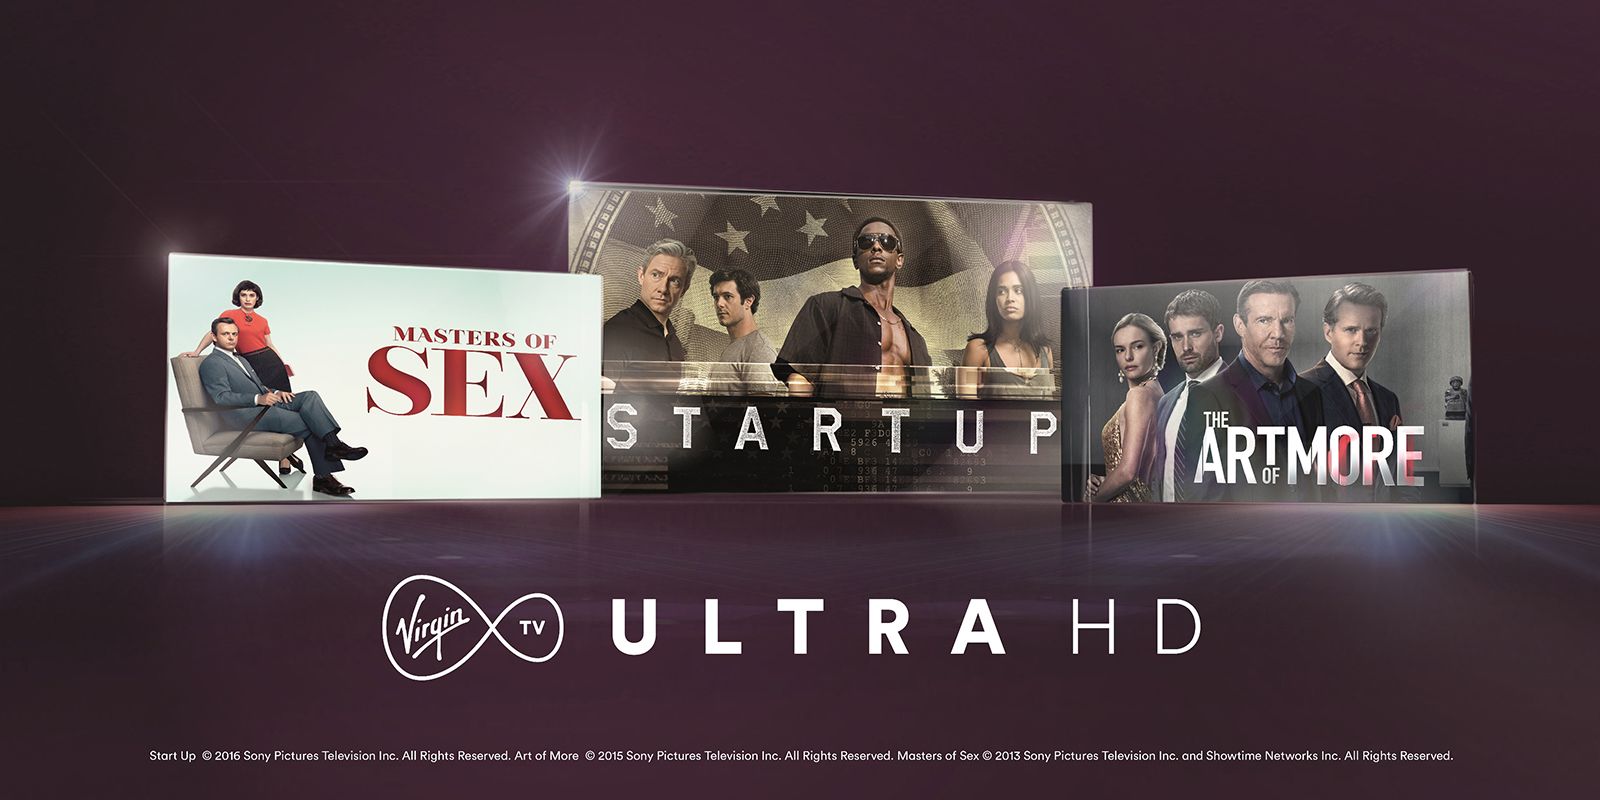 Virgin Media Launches Own 4k Tv Channel But It’s Not For Everyone image 2